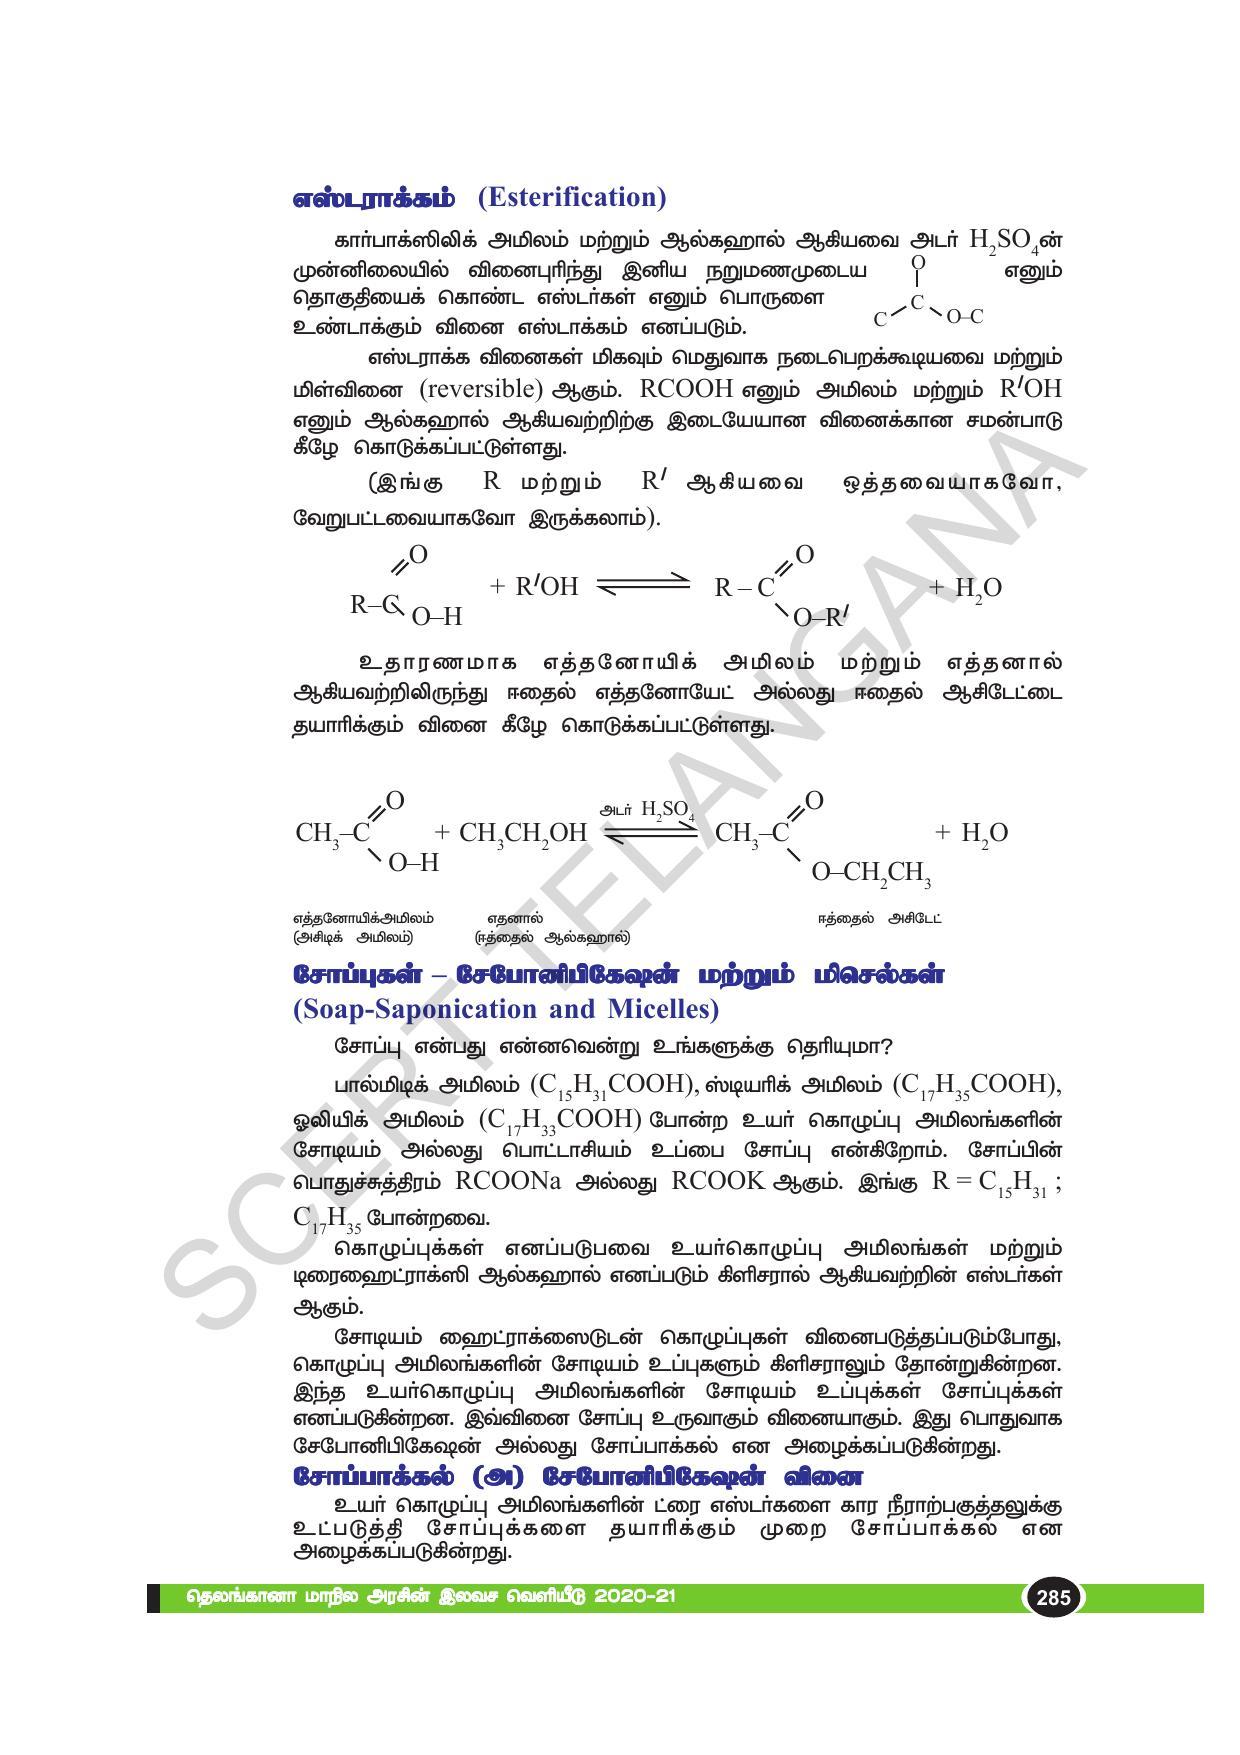 TS SCERT Class 10 Physical Science(Tamil Medium) Text Book - Page 297